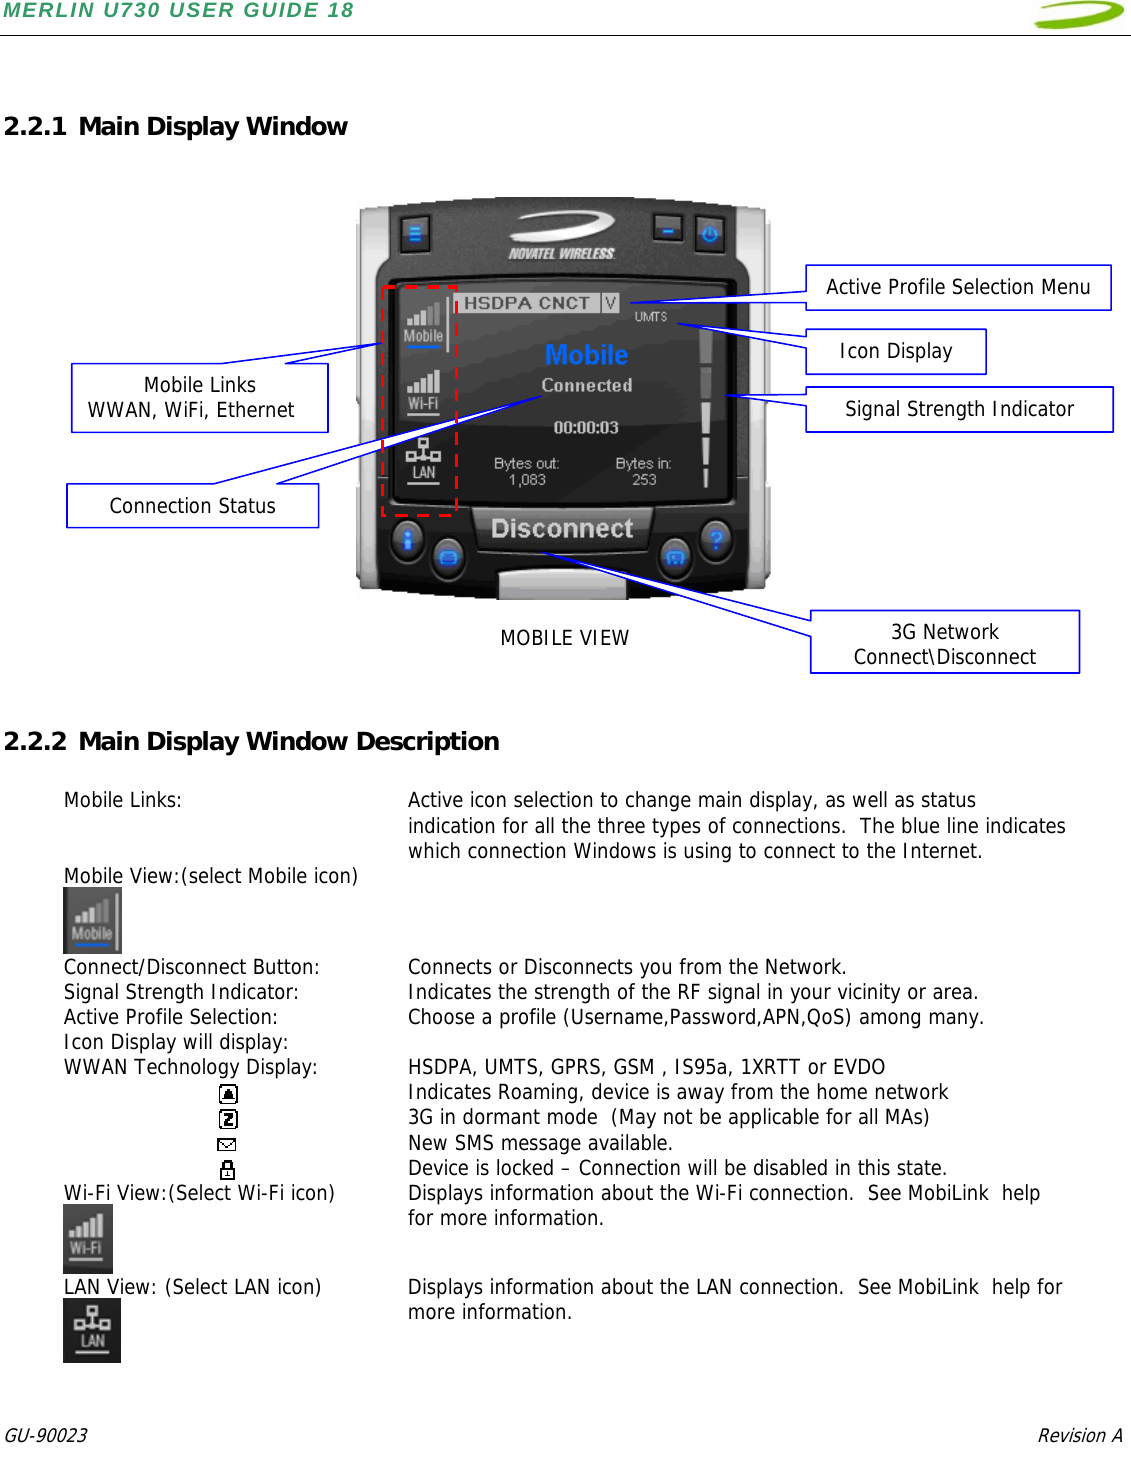 MERLIN U730 USER GUIDE 18  GU-90023            Revision A    2.2.1 Main Display Window     MOBILE VIEW   2.2.2 Main Display Window Description  Mobile Links:  Active icon selection to change main display, as well as status indication for all the three types of connections.  The blue line indicates which connection Windows is using to connect to the Internet. Mobile View:(select Mobile icon)   Connect/Disconnect Button:  Connects or Disconnects you from the Network. Signal Strength Indicator:  Indicates the strength of the RF signal in your vicinity or area. Active Profile Selection:  Choose a profile (Username,Password,APN,QoS) among many.   Icon Display will display:   WWAN Technology Display:  HSDPA, UMTS, GPRS, GSM , IS95a, 1XRTT or EVDO   Indicates Roaming, device is away from the home network   3G in dormant mode  (May not be applicable for all MAs)     New SMS message available.   Device is locked – Connection will be disabled in this state. Wi-Fi View:(Select Wi-Fi icon)  Displays information about the Wi-Fi connection.  See MobiLink  help for more information. LAN View: (Select LAN icon)  Displays information about the LAN connection.  See MobiLink  help for more information.   Mobile Links WWAN, WiFi, Ethernet 3G Network Connect\DisconnectSignal Strength IndicatorActive Profile Selection MenuIcon DisplayConnection Status 